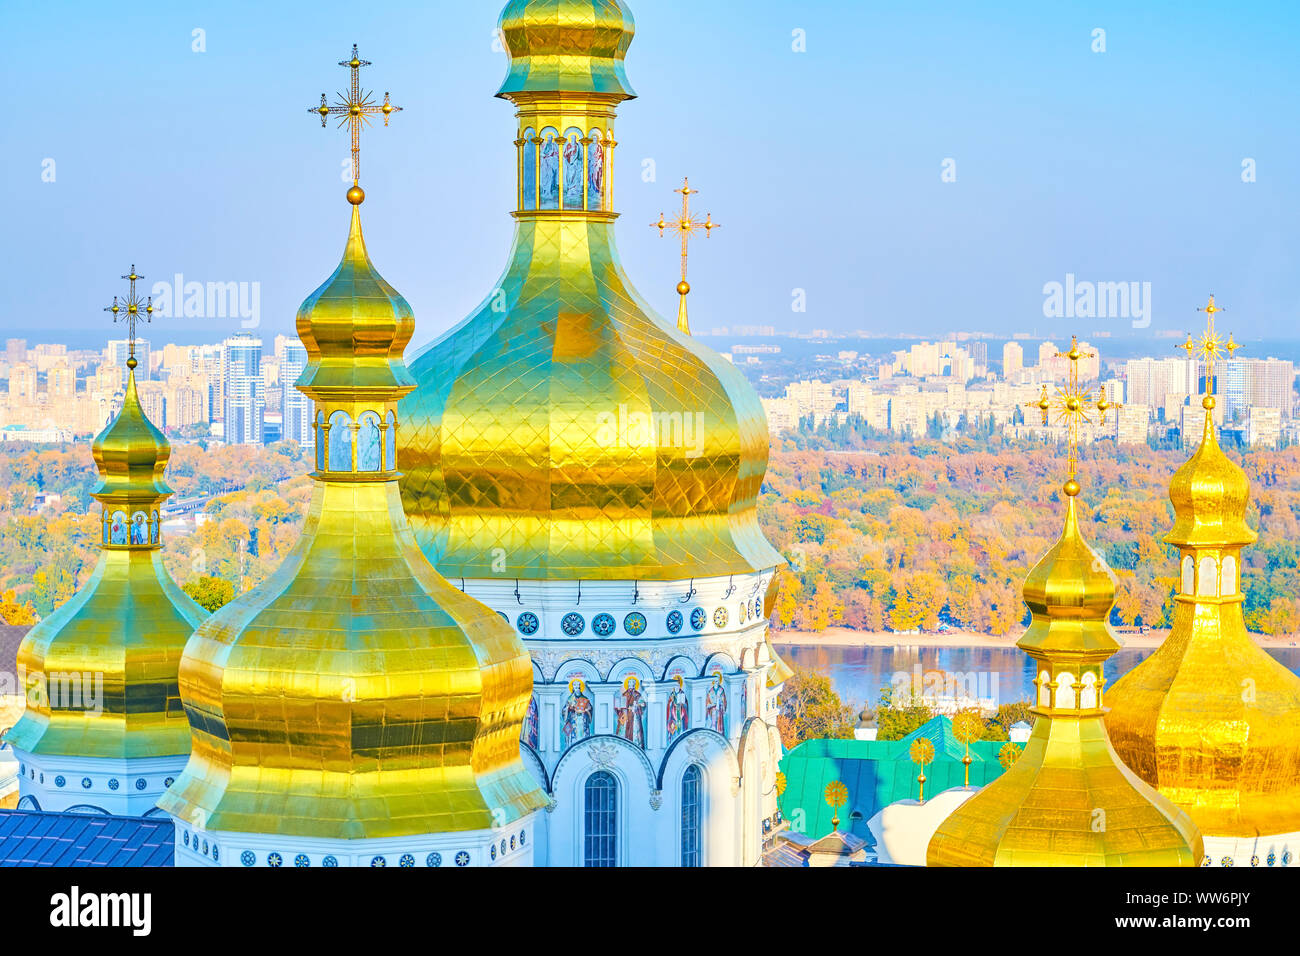 The beautiful Golden domes of Dormition Cathedral of Kiev Pechersk Lavra and the residential districts of the city on background, Ukraine Stock Photo